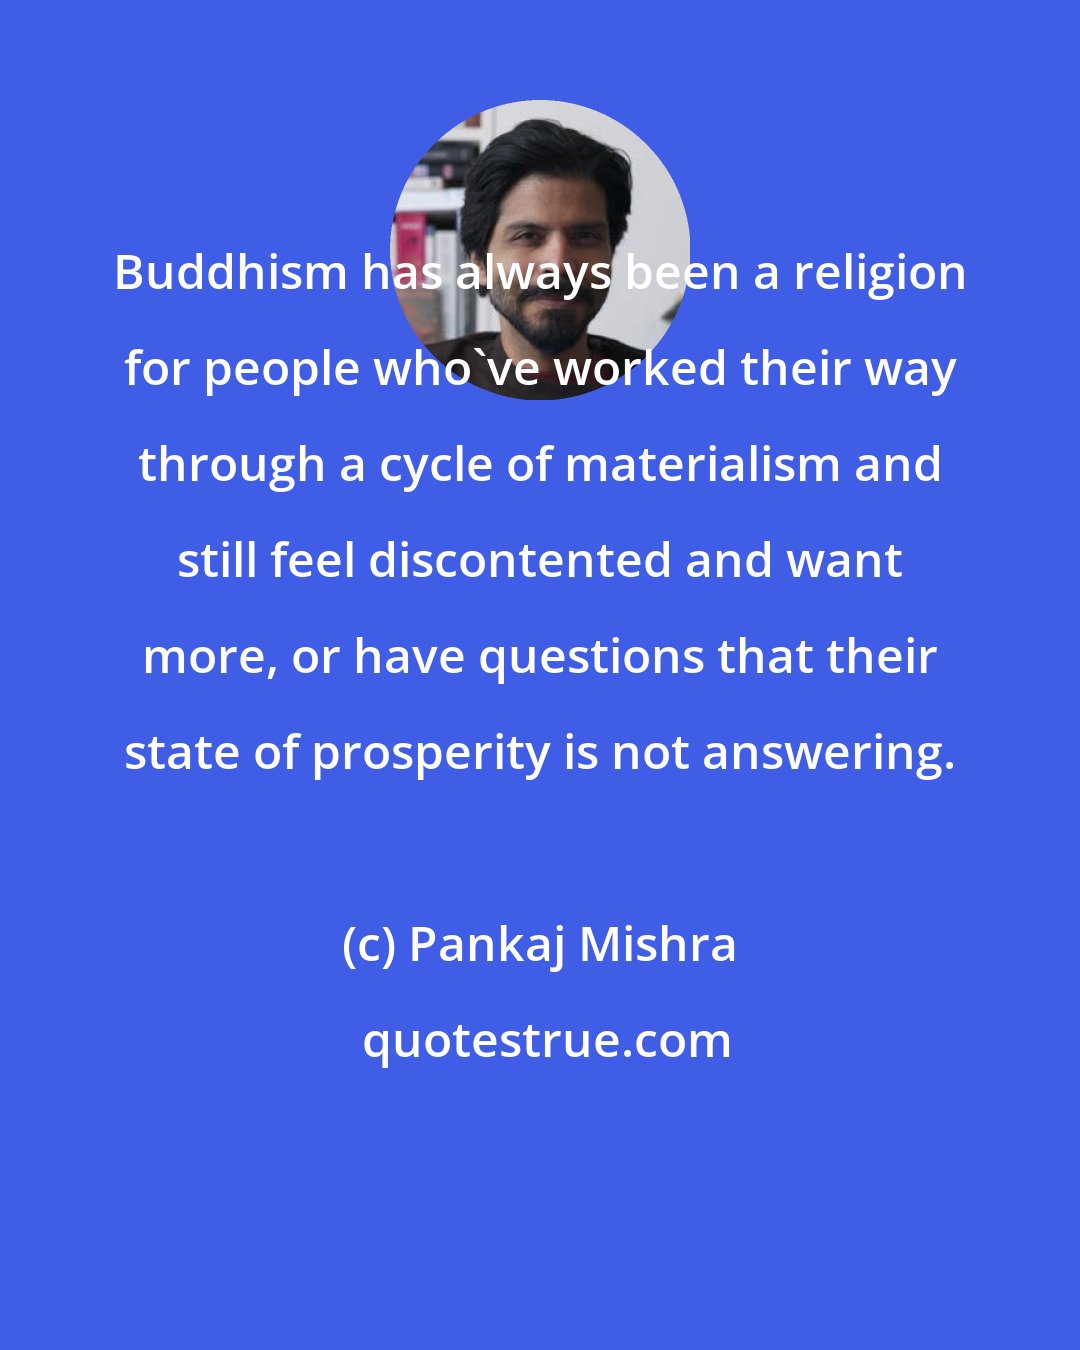 Pankaj Mishra: Buddhism has always been a religion for people who've worked their way through a cycle of materialism and still feel discontented and want more, or have questions that their state of prosperity is not answering.